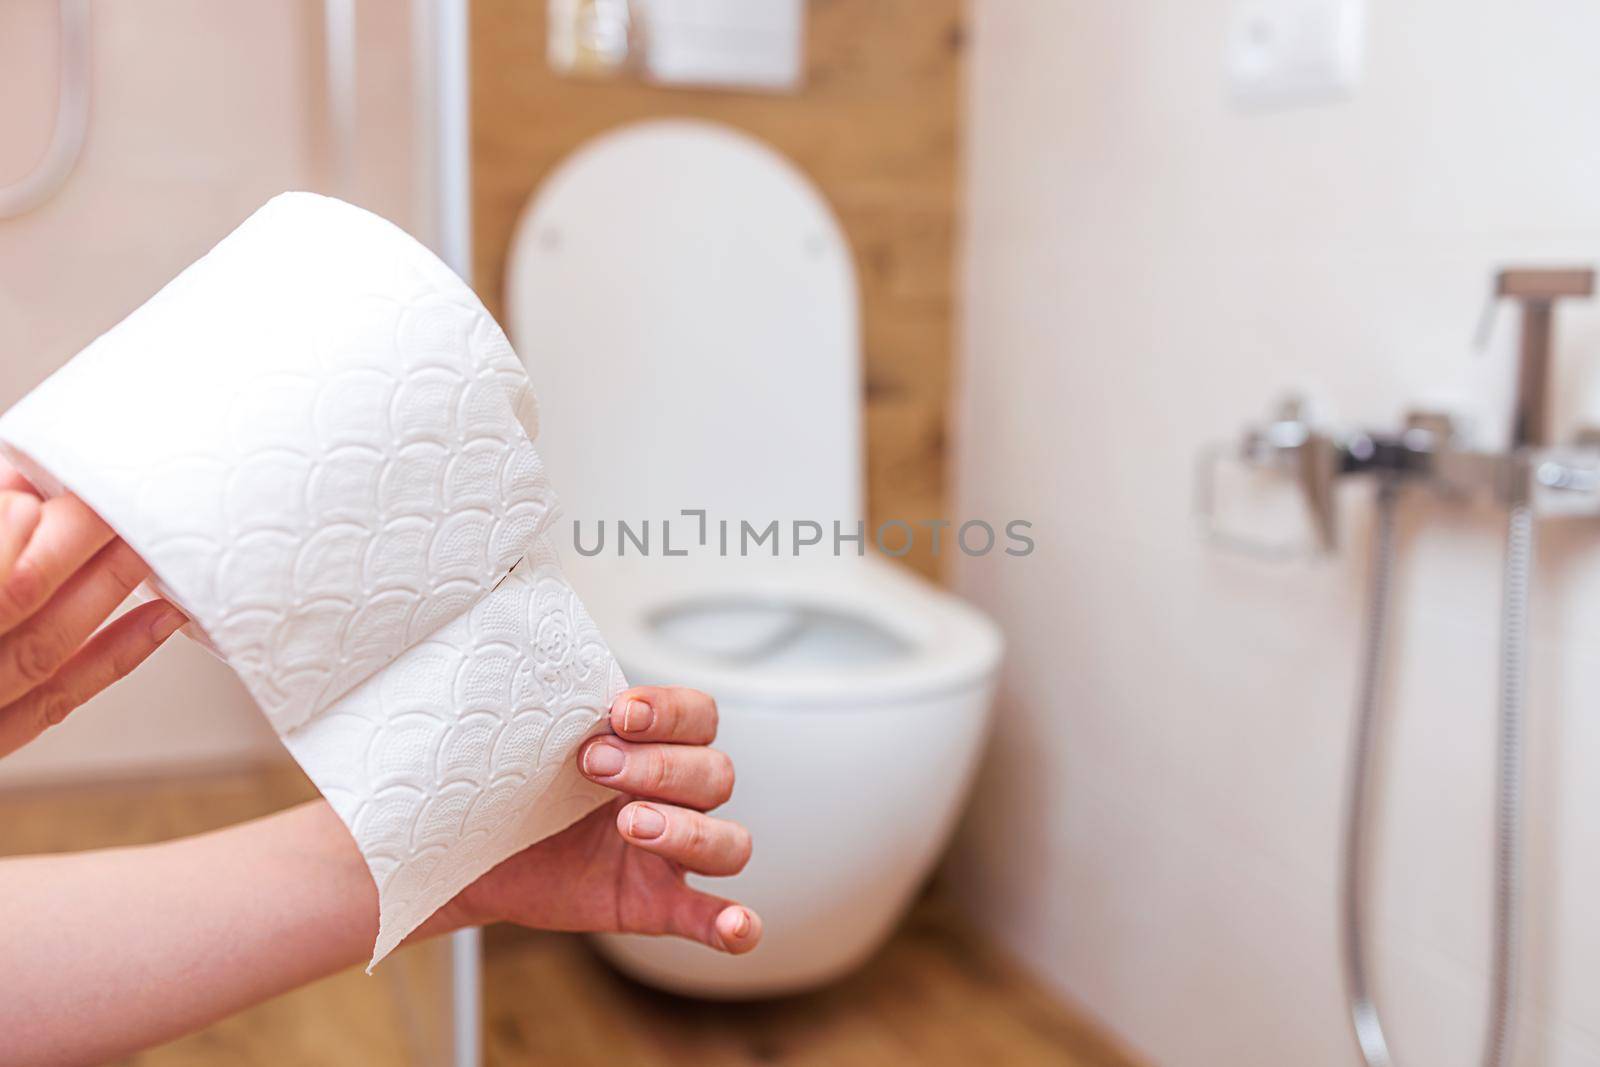 Bathroom background, closeup of woman's hand holding roll of white toilet paper, copy paste space. The concept of hygiene, cleanliness, human health and the importance of gentle personal care products